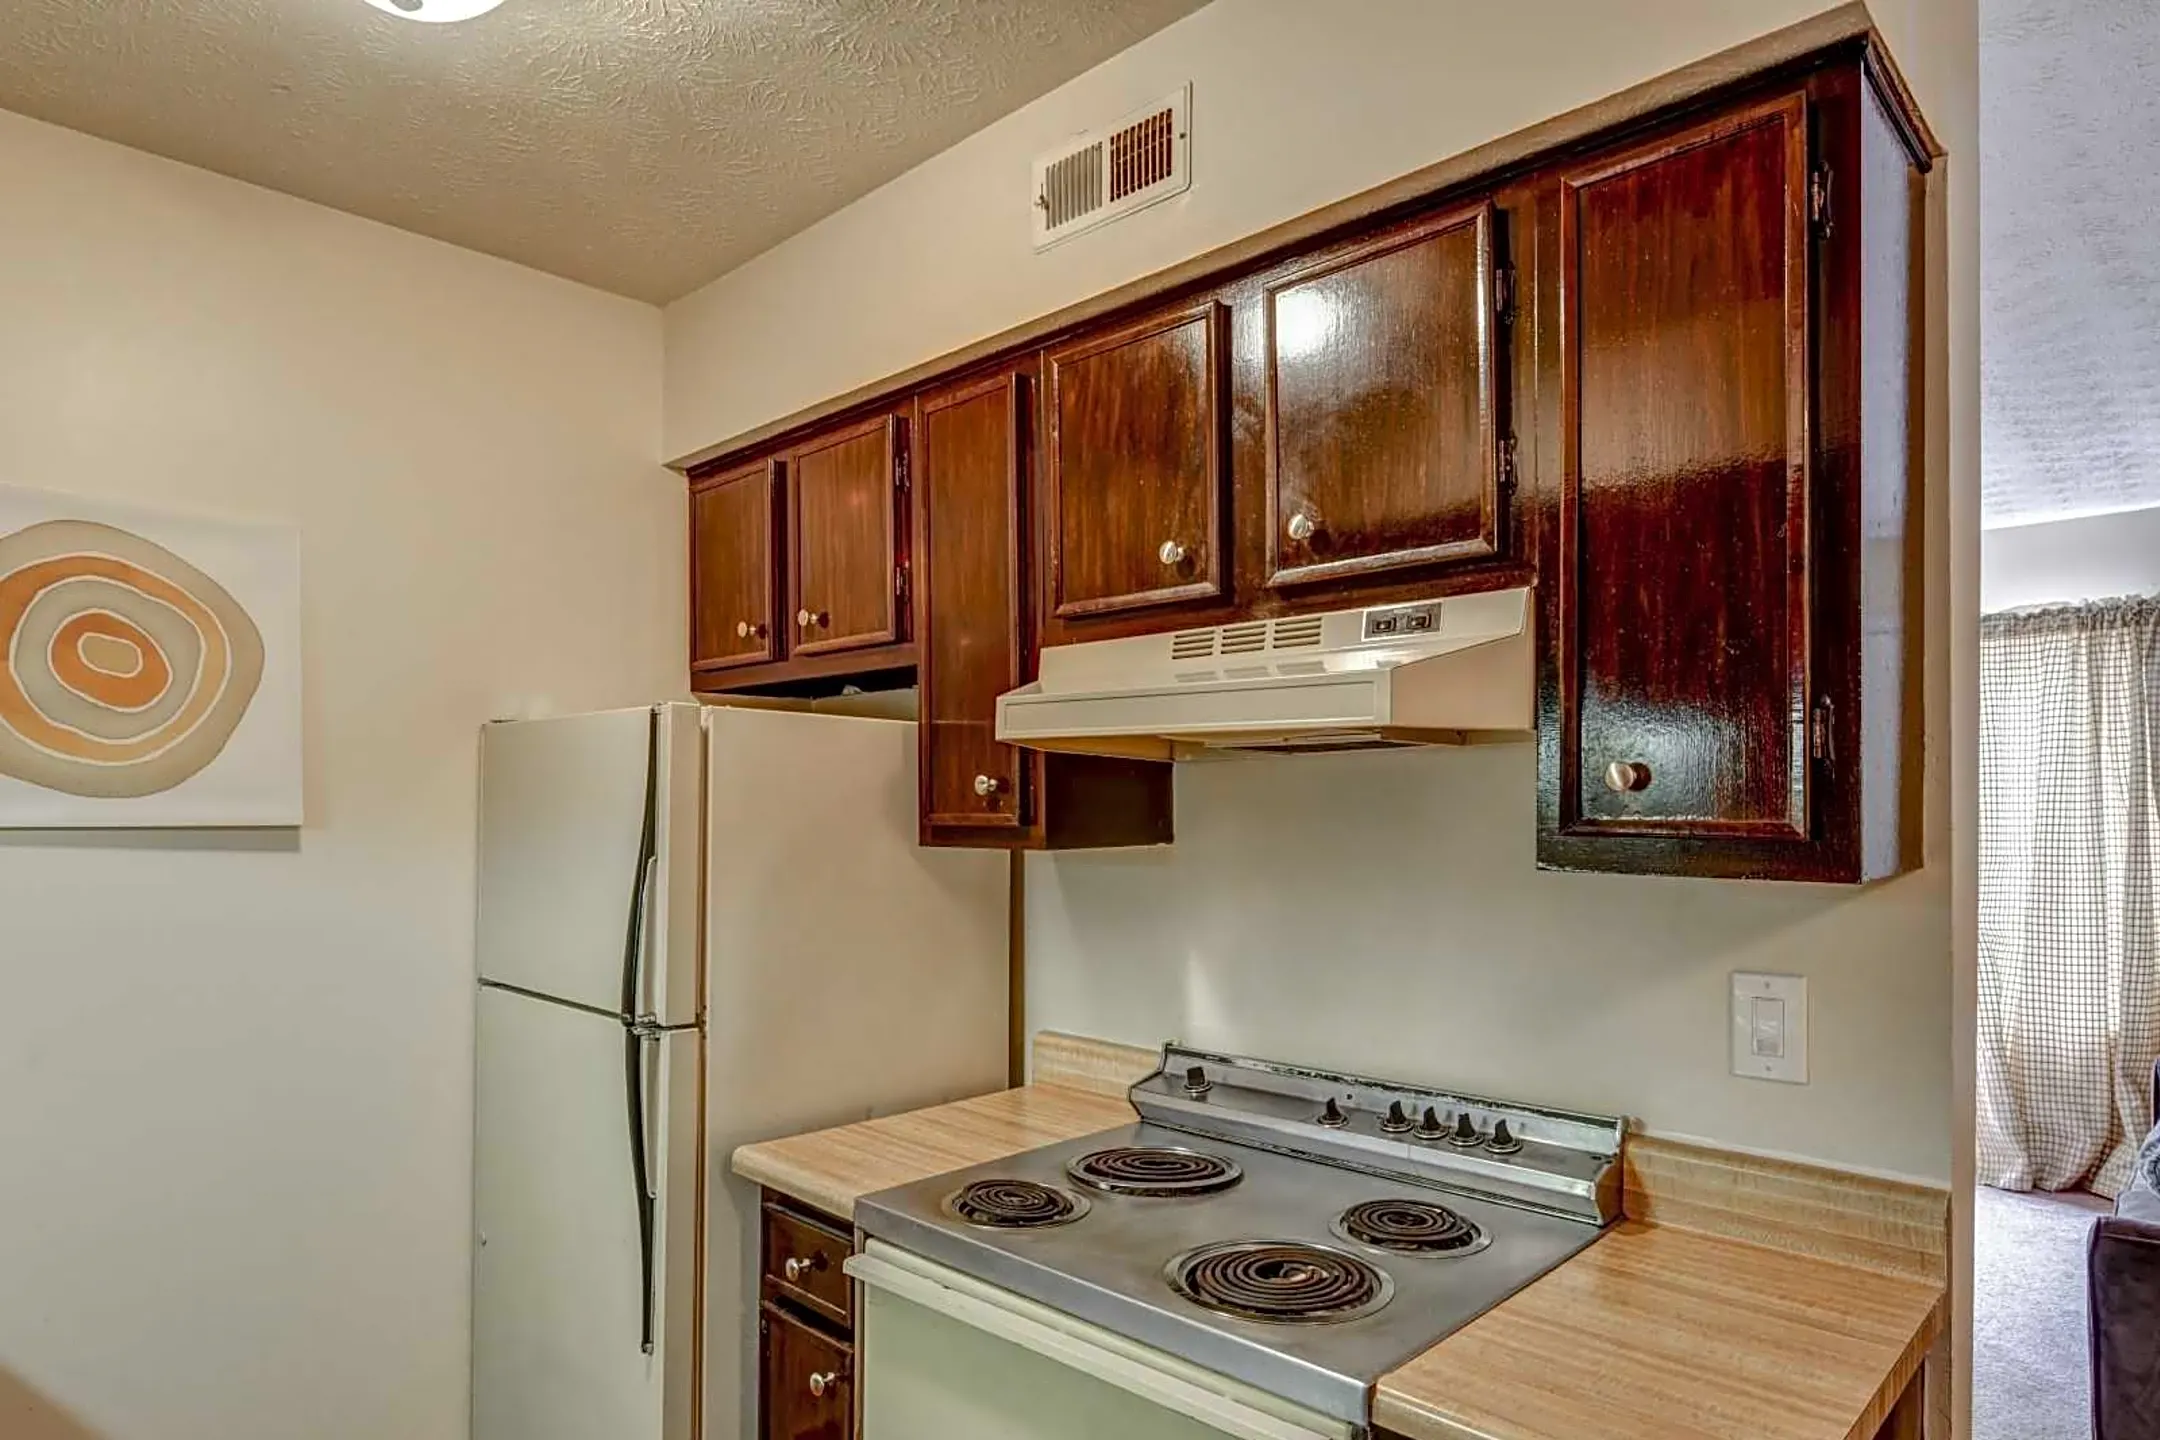 Kitchen - Lake Eden Apartments and Townhomes - Columbus, OH